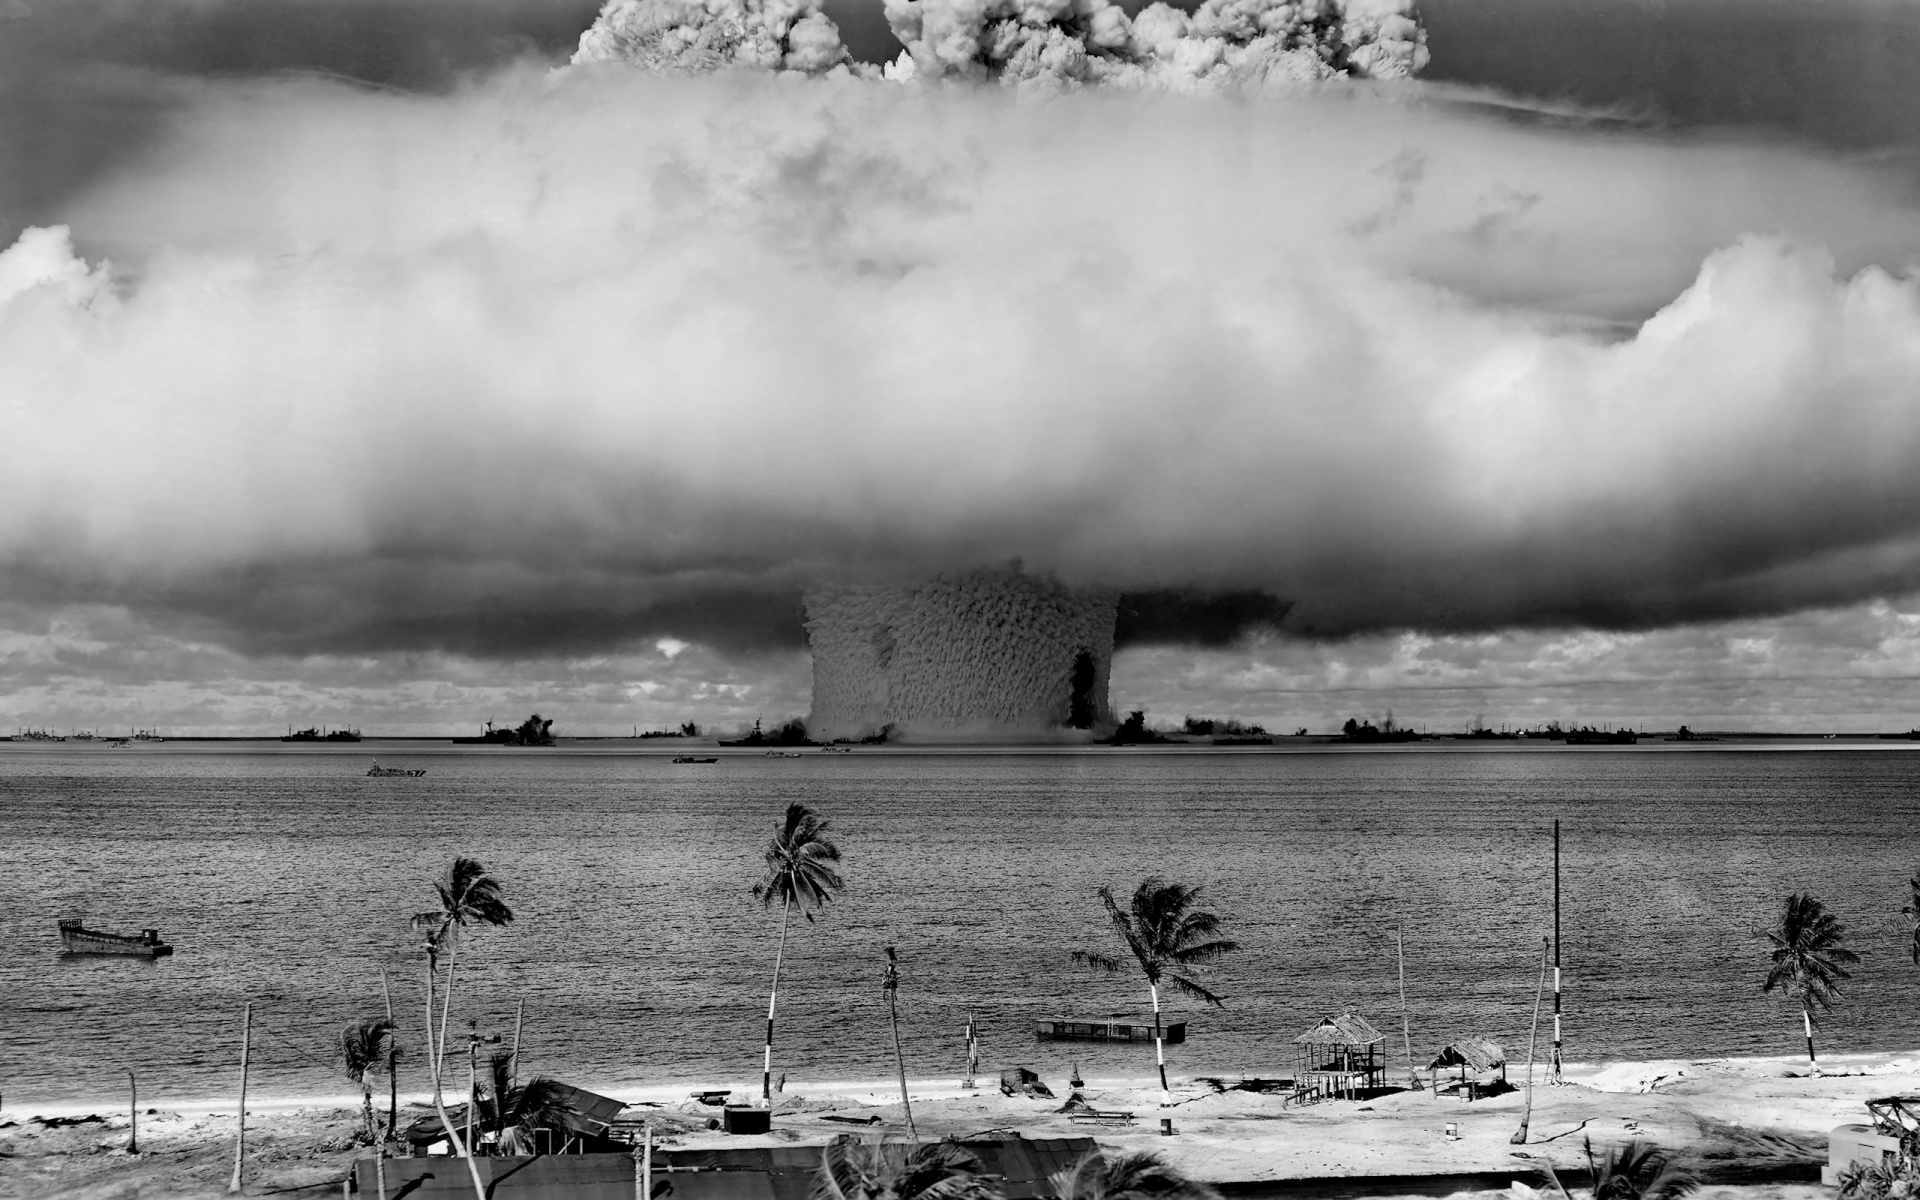 Wallpaper ocean explosion nuclear explosion nuclear weapons test